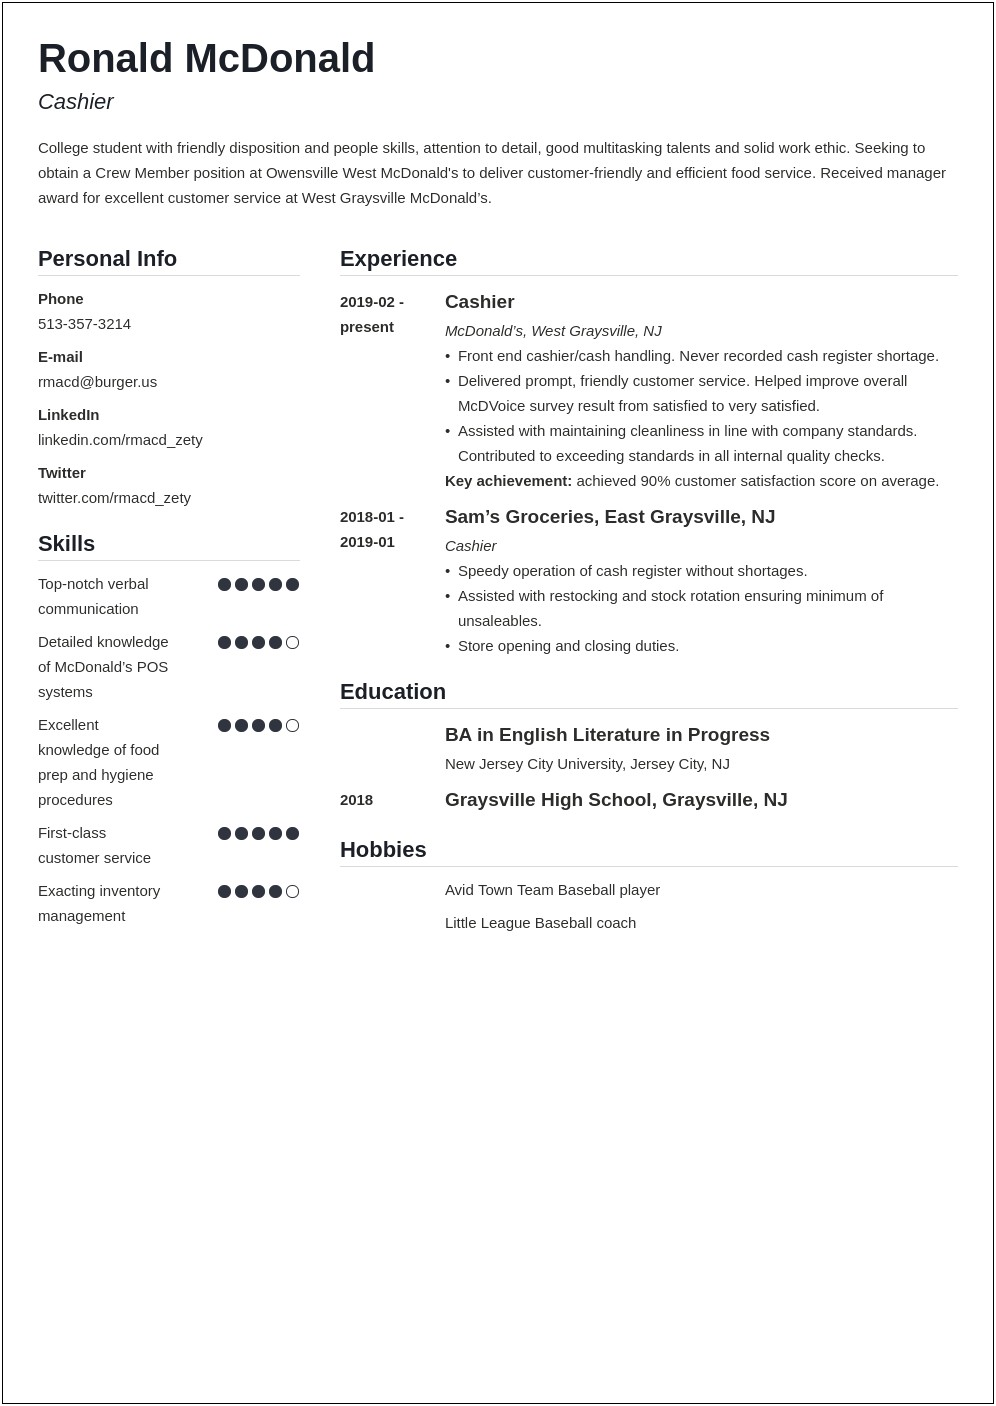 Resume Sample From A Person Working In Mcdonalds